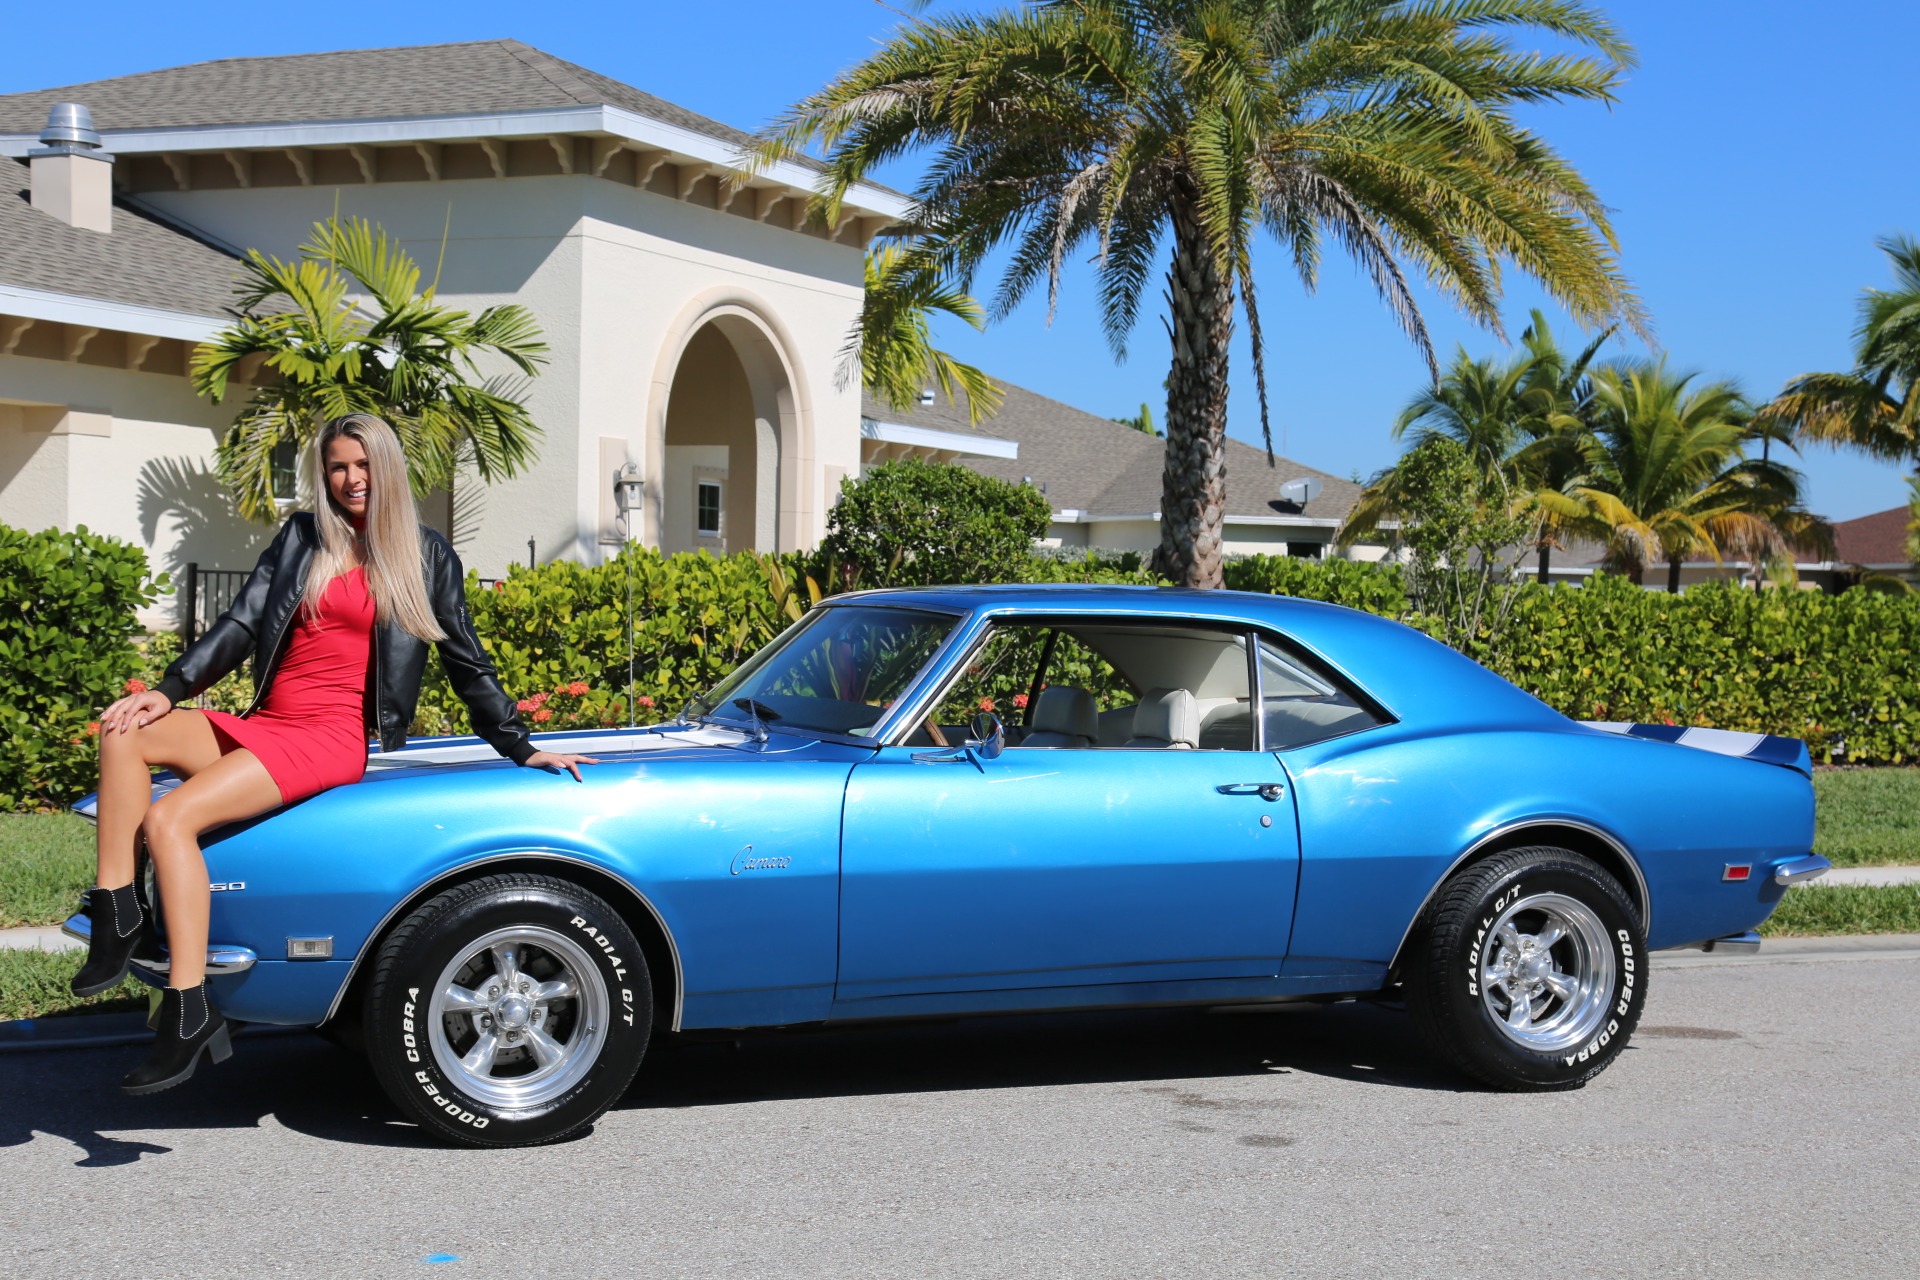 Used 1968 Chevy Camaro Coupe 4 Speed manual 350 stroked to 383 Engine AC for sale Sold at Muscle Cars for Sale Inc. in Fort Myers FL 33912 4